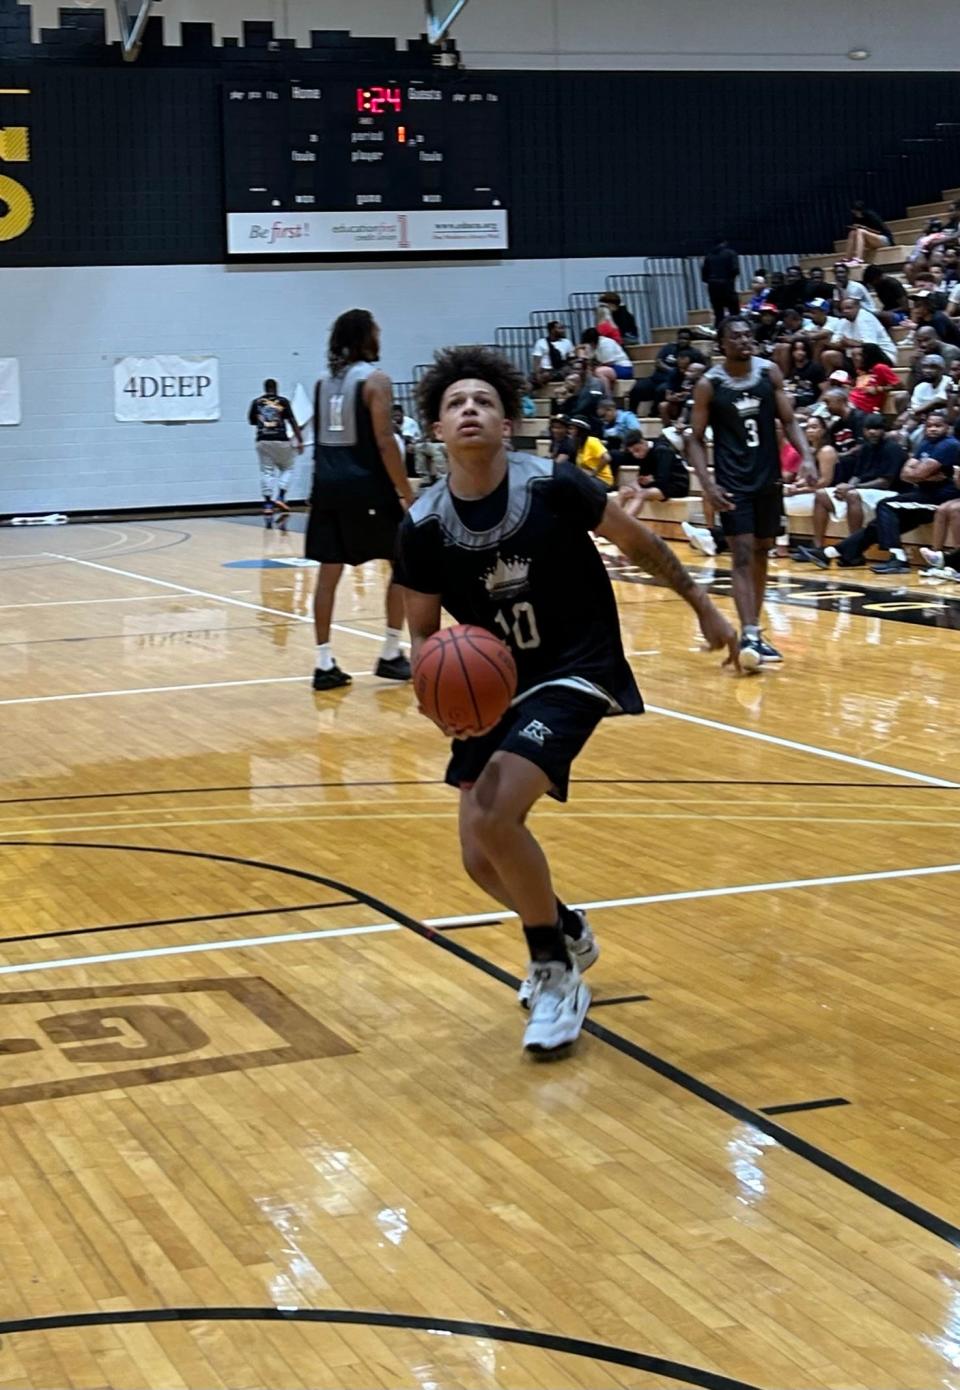 John "Juni" Mobley Jr., an Ohio State verbal commitment for the 2024 class, suited up in the Kingdom Summer League at Ohio Dominican on August 6, 2023.